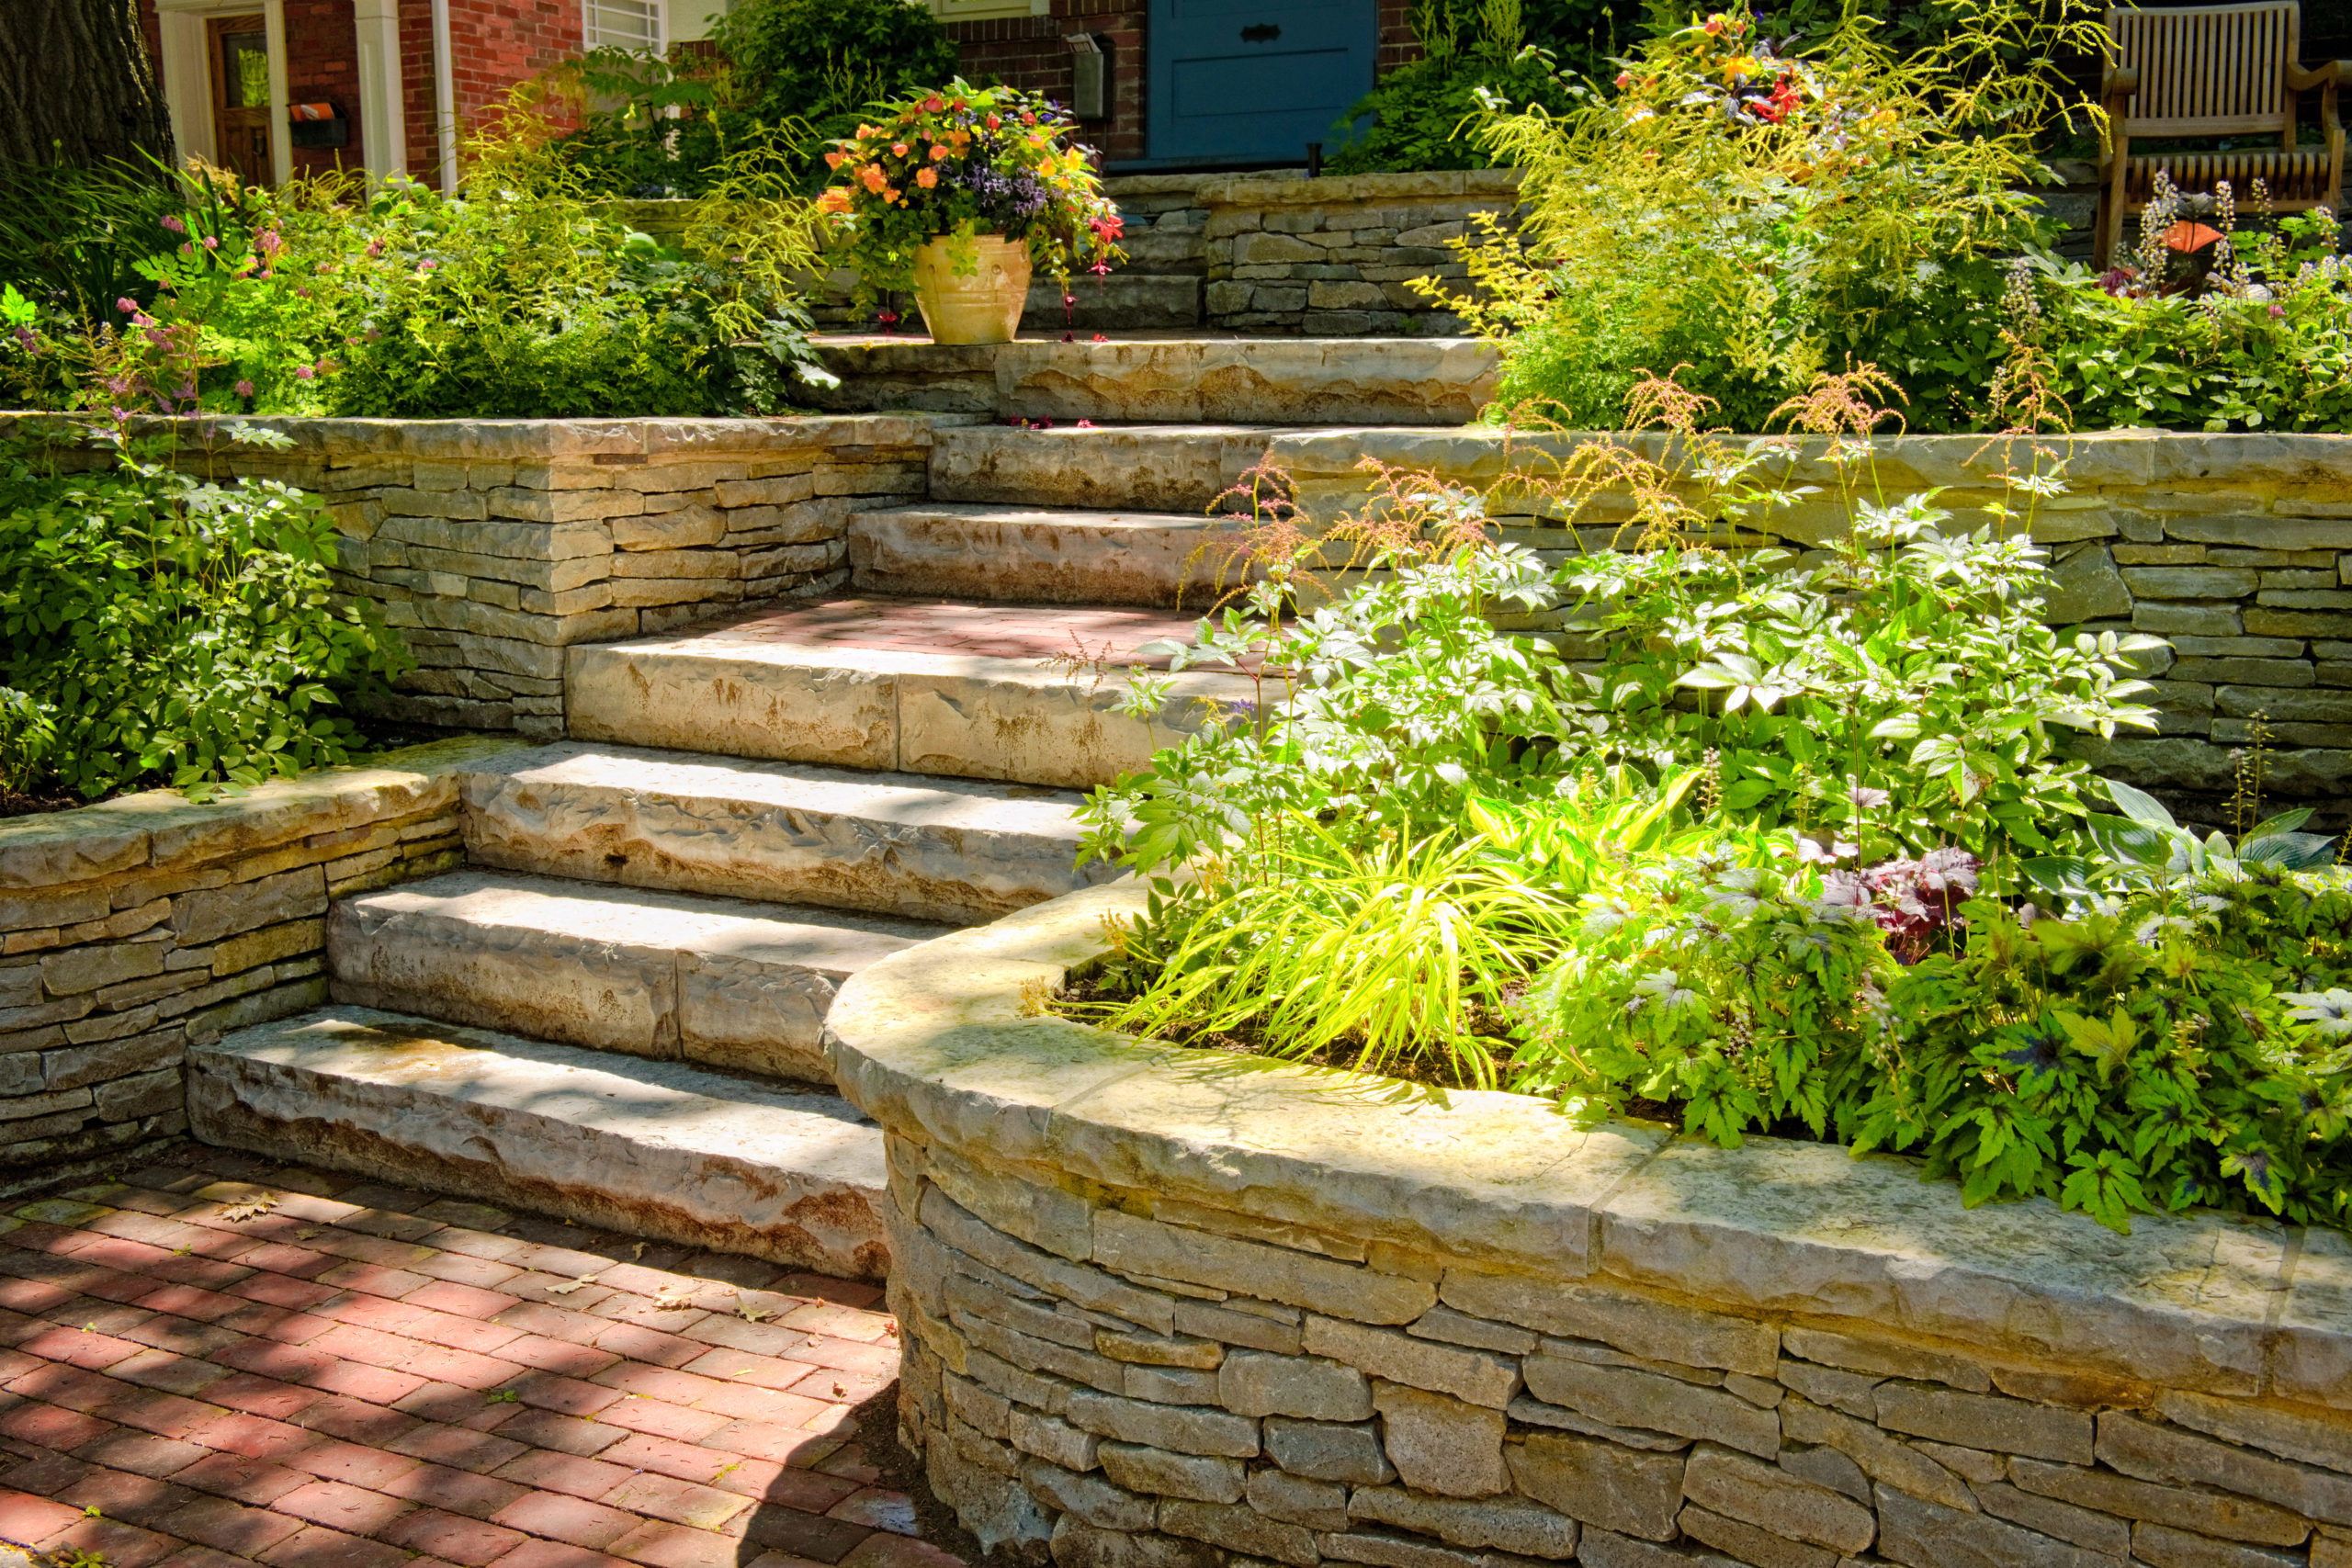 Improve Your Property with Hardscapes and Stone Walls